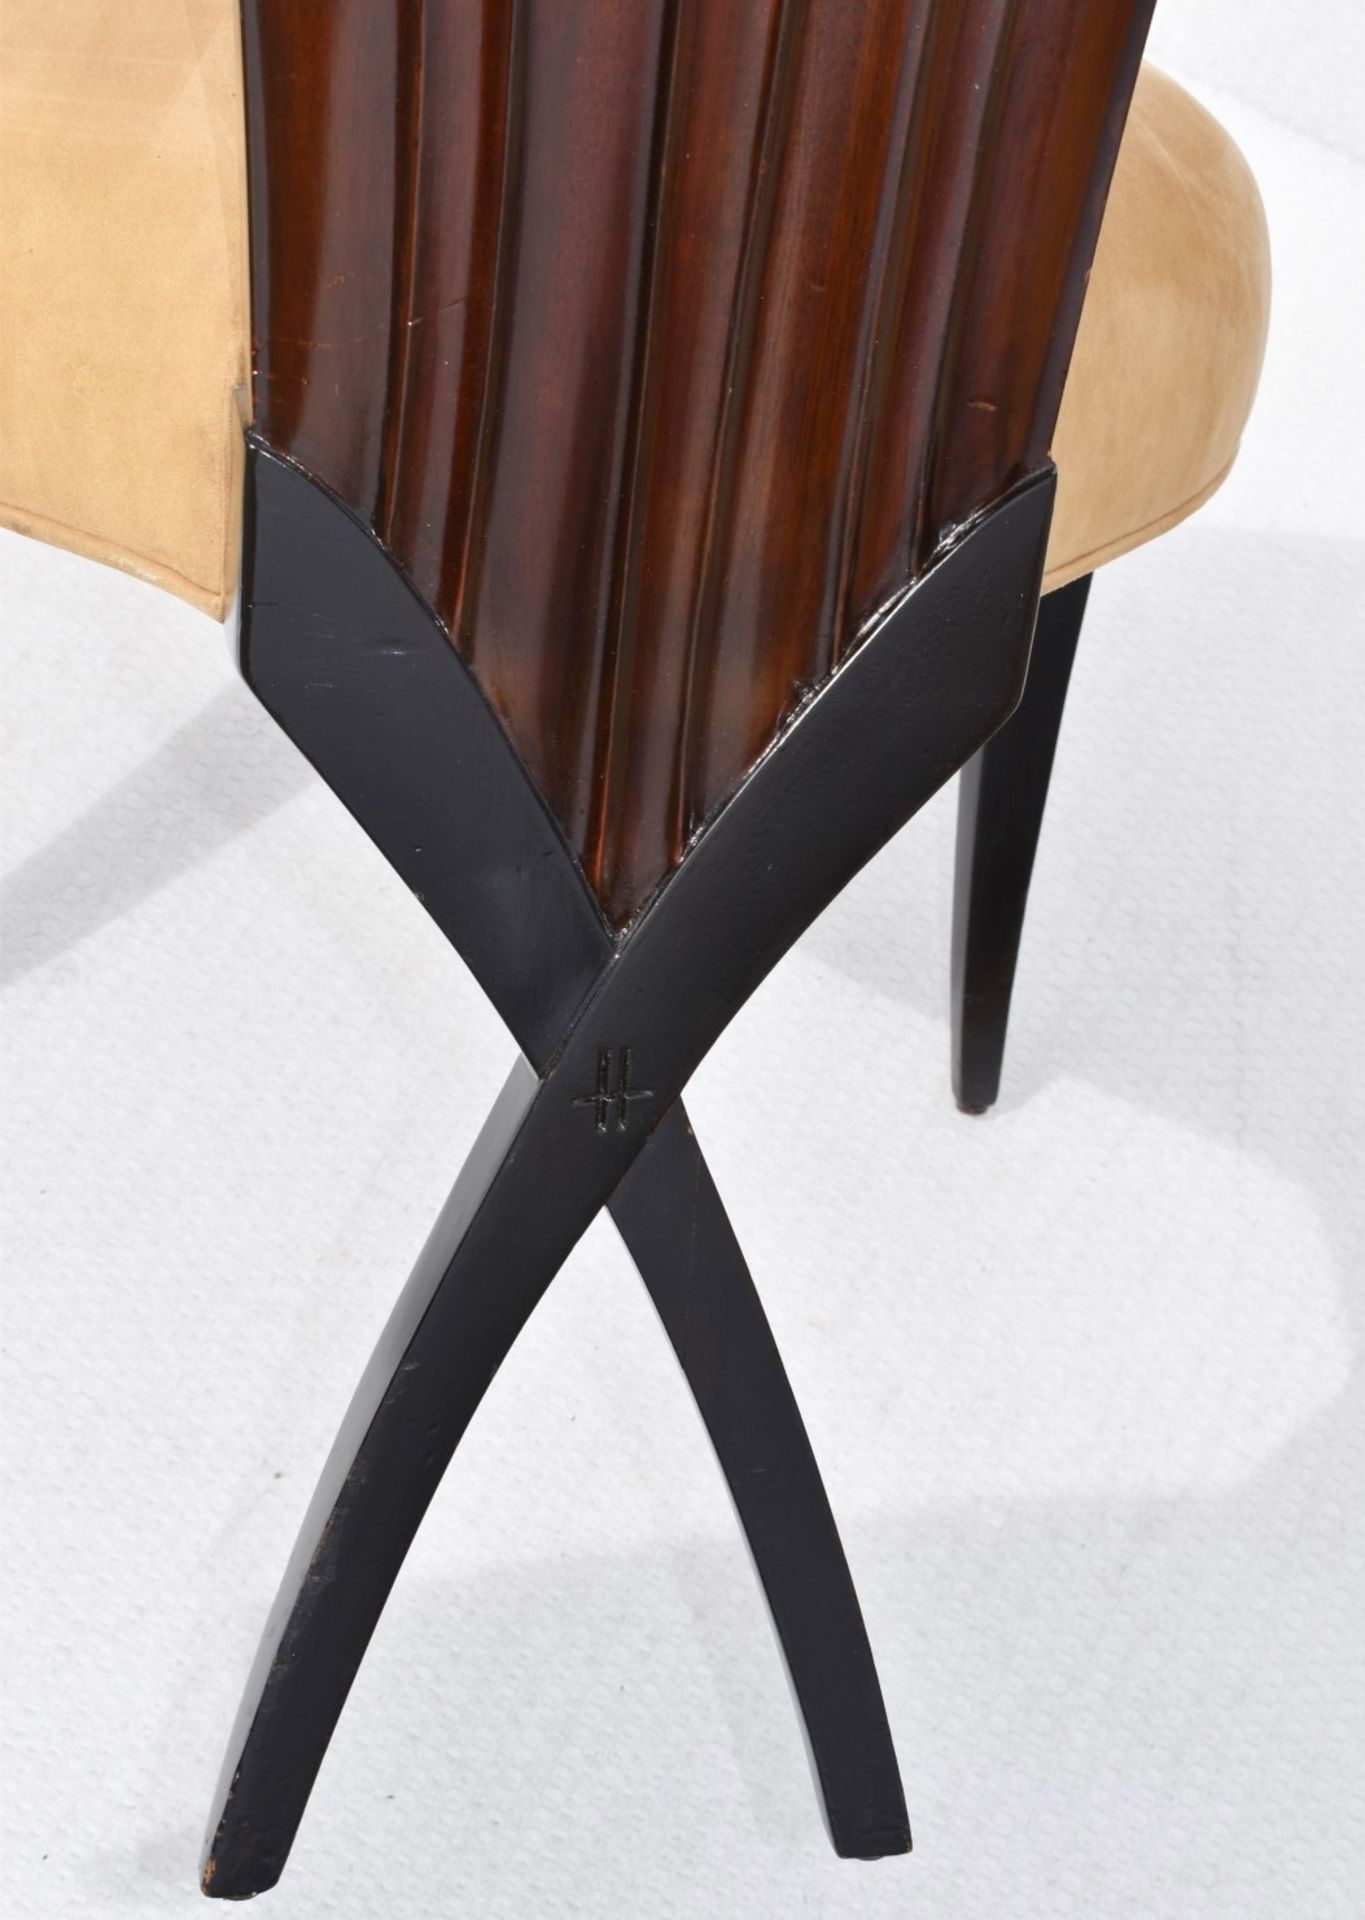 6 x CHRISTOPHER GUY 'La Croisette' Luxury Hand-carved Solid Mahogany Designer Dining Chairs - - Image 6 of 11